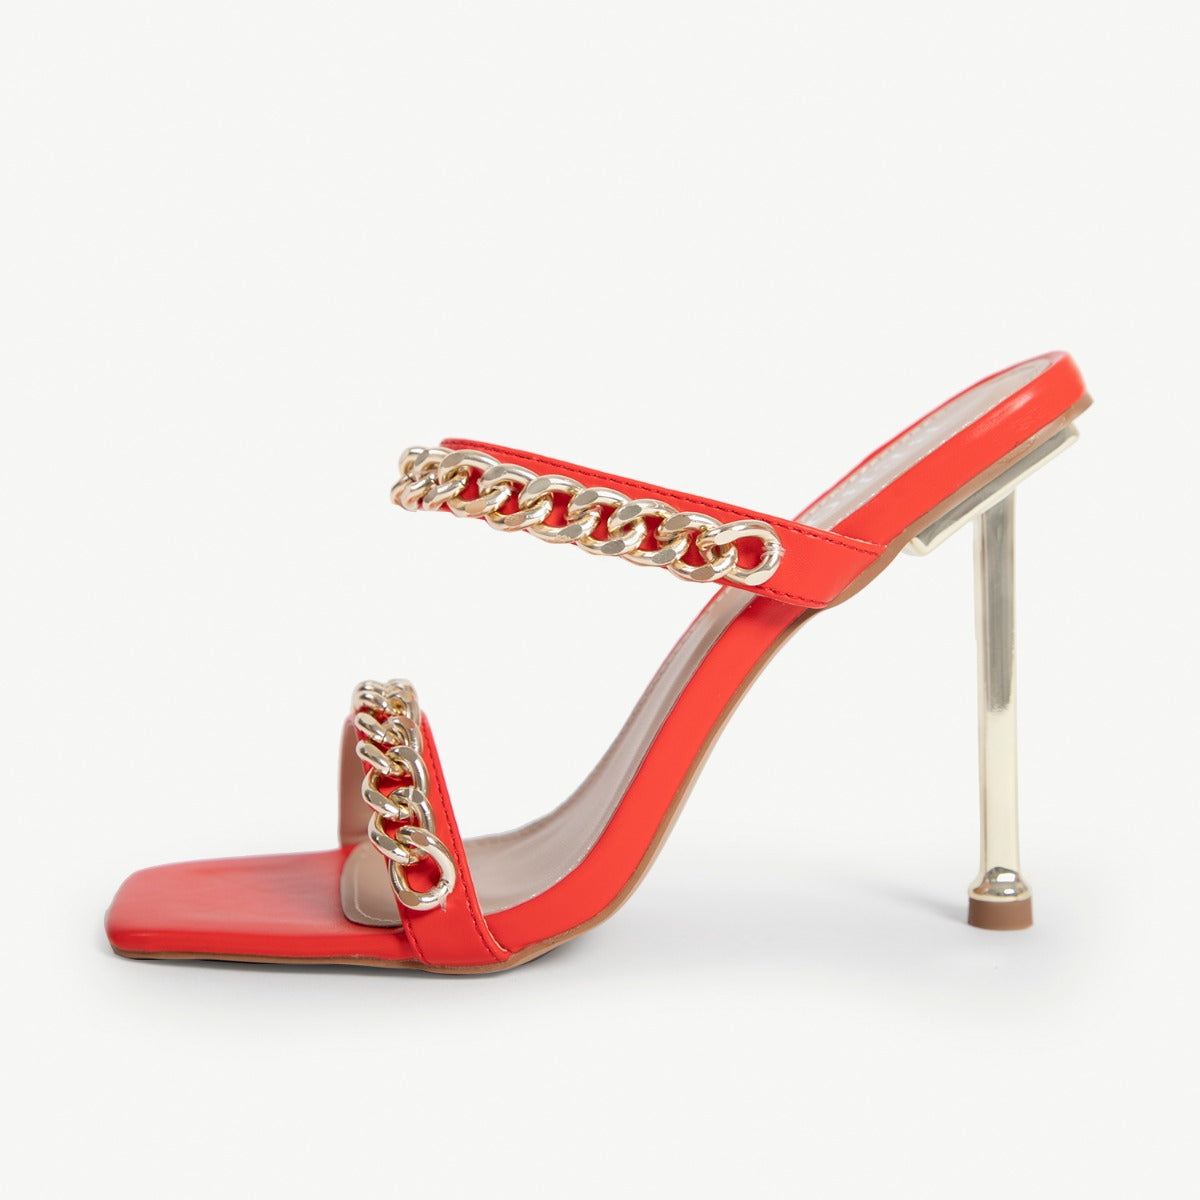 BEBO Neevie Chained Mule in Red